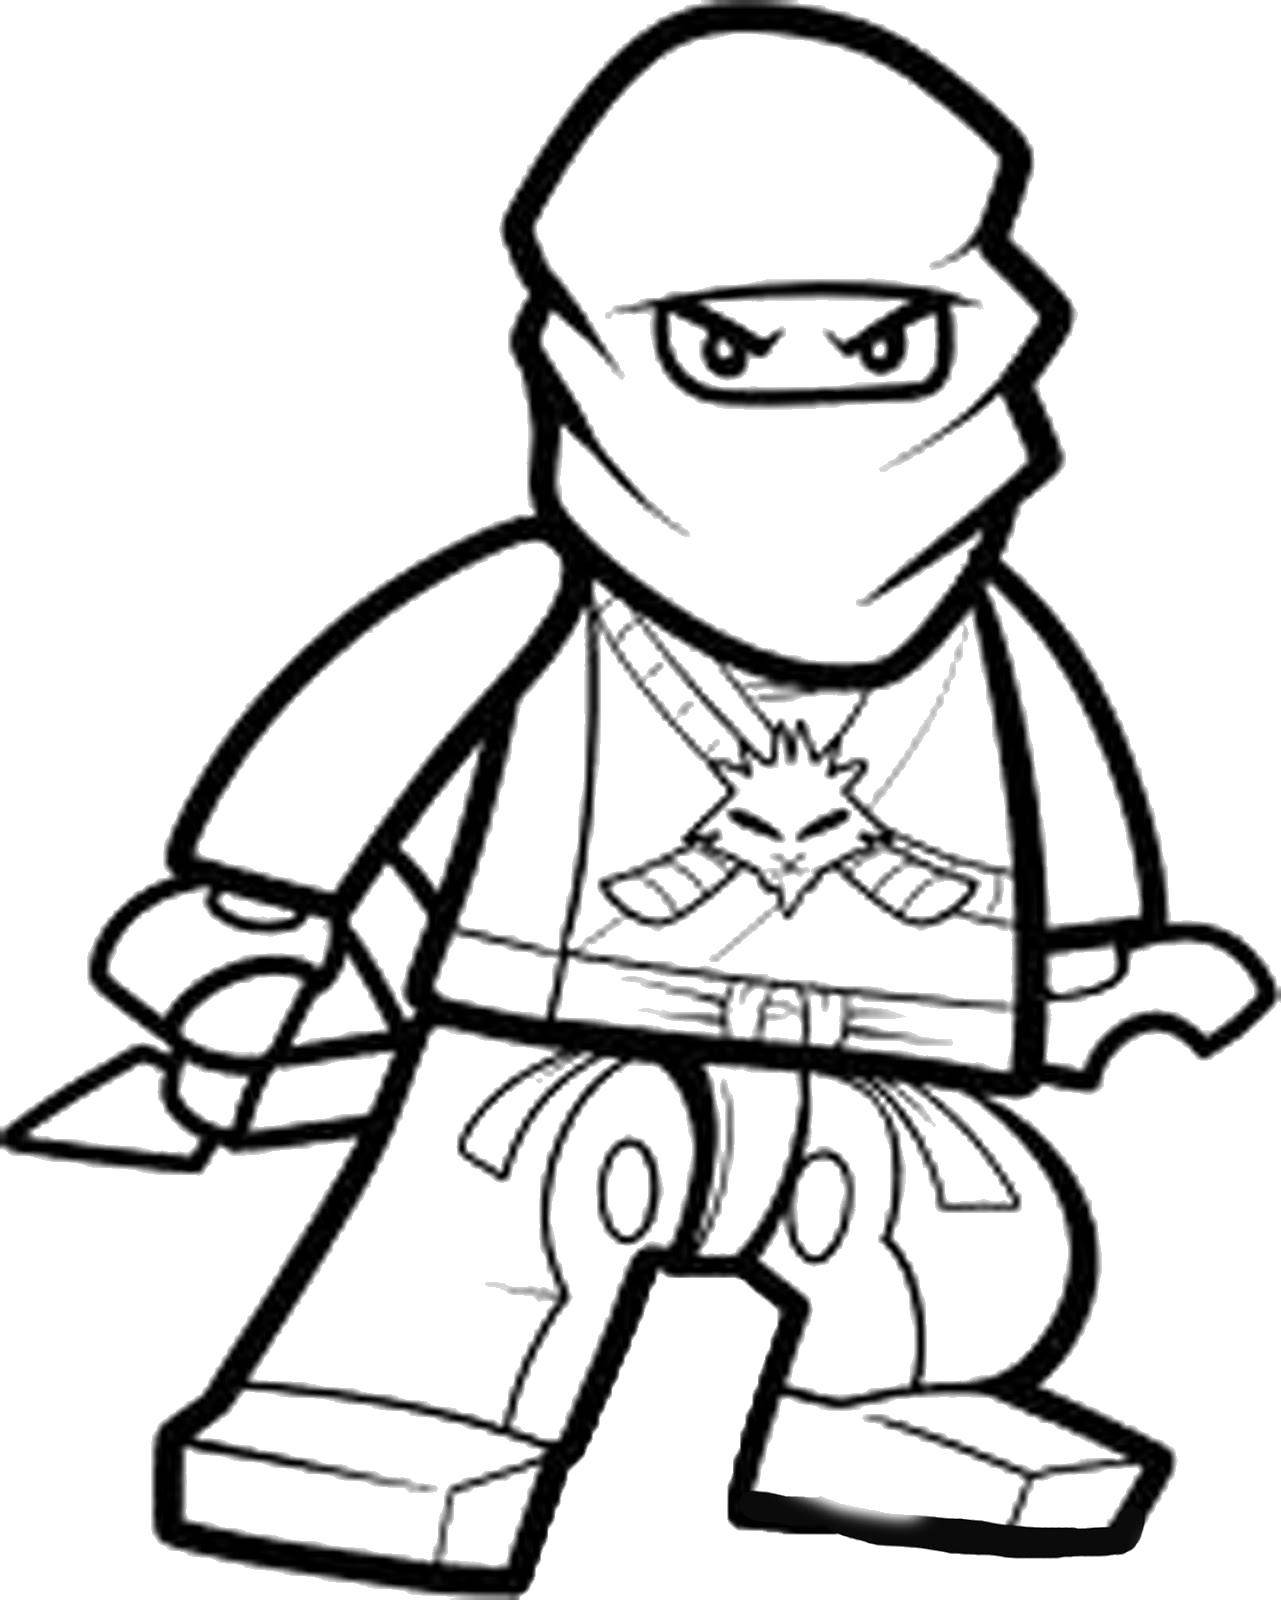 Coloring Ninja from LEGO. Category toy. Tags:  Designer, LEGO.